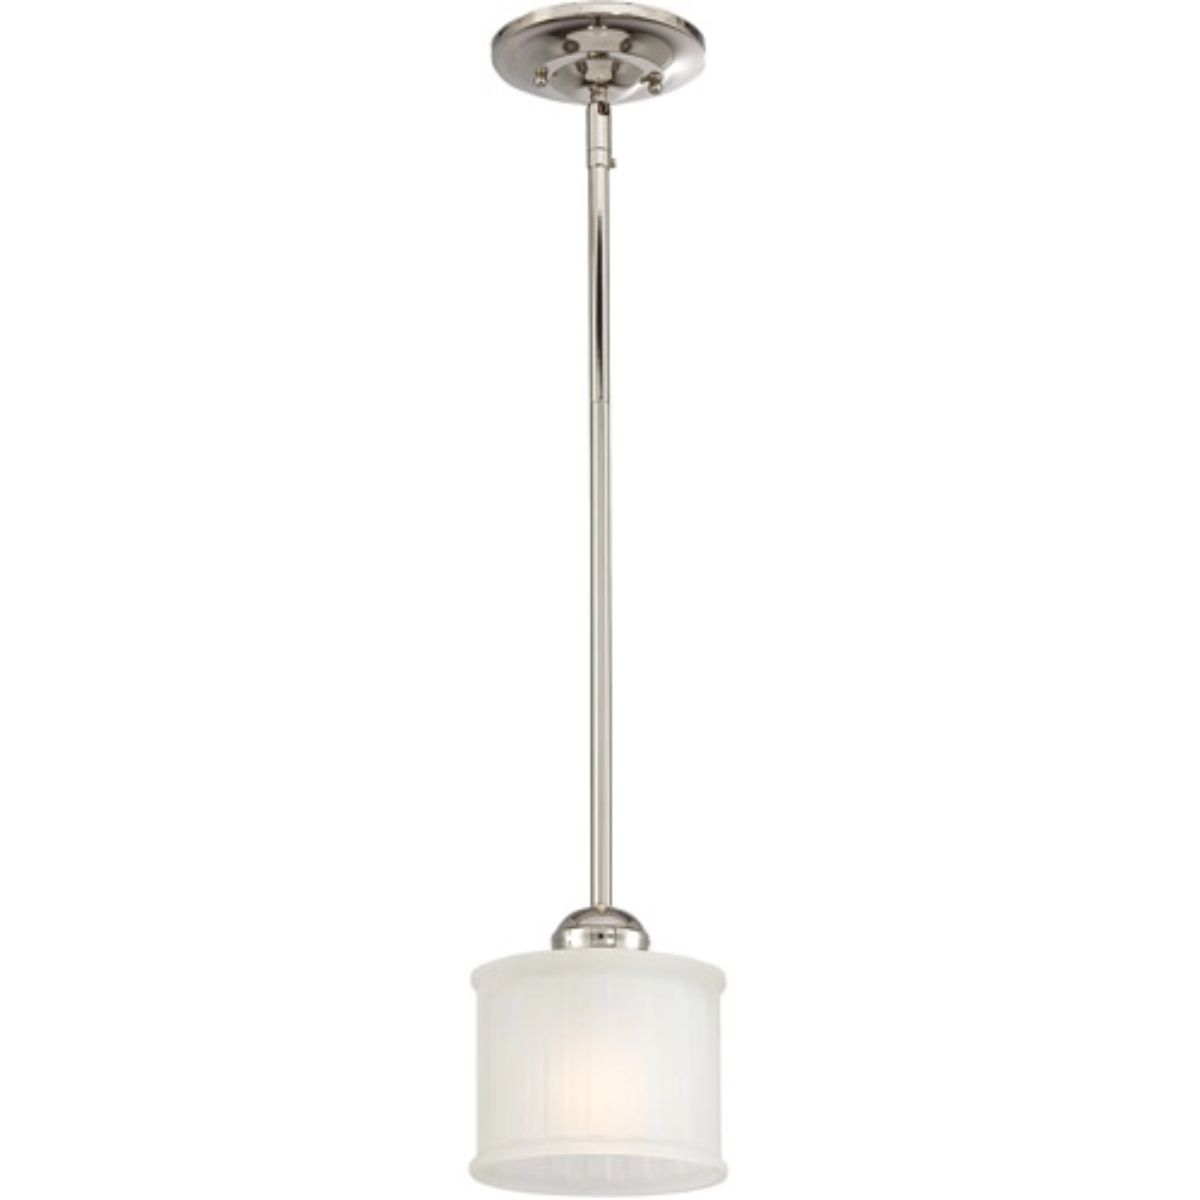 1730 Series 6 in. Pendant Light Polished Nickel Finish